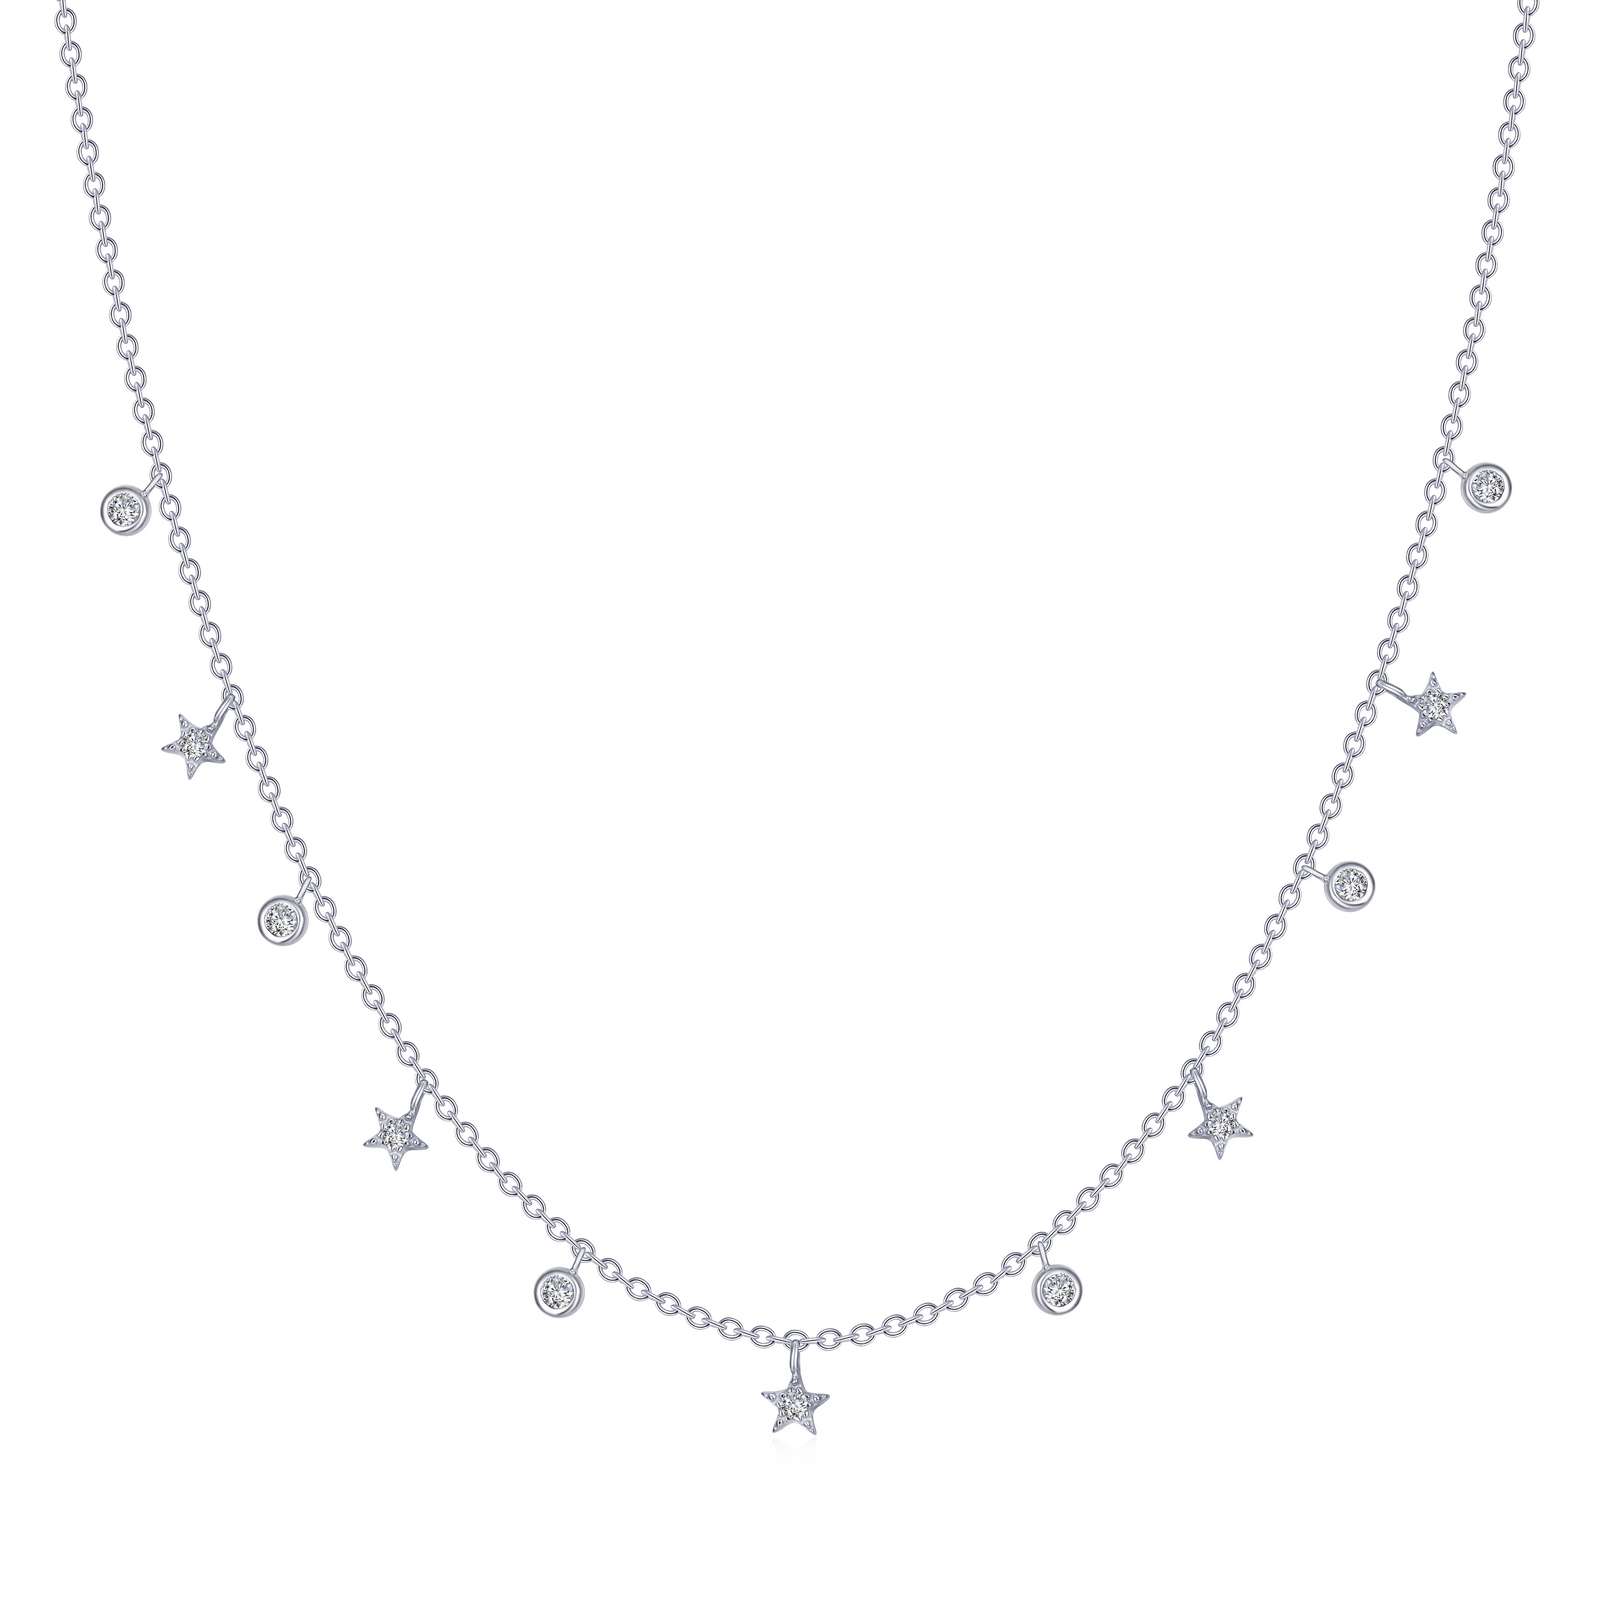 Starfall Necklace Griner Jewelry Co. Moultrie, GA